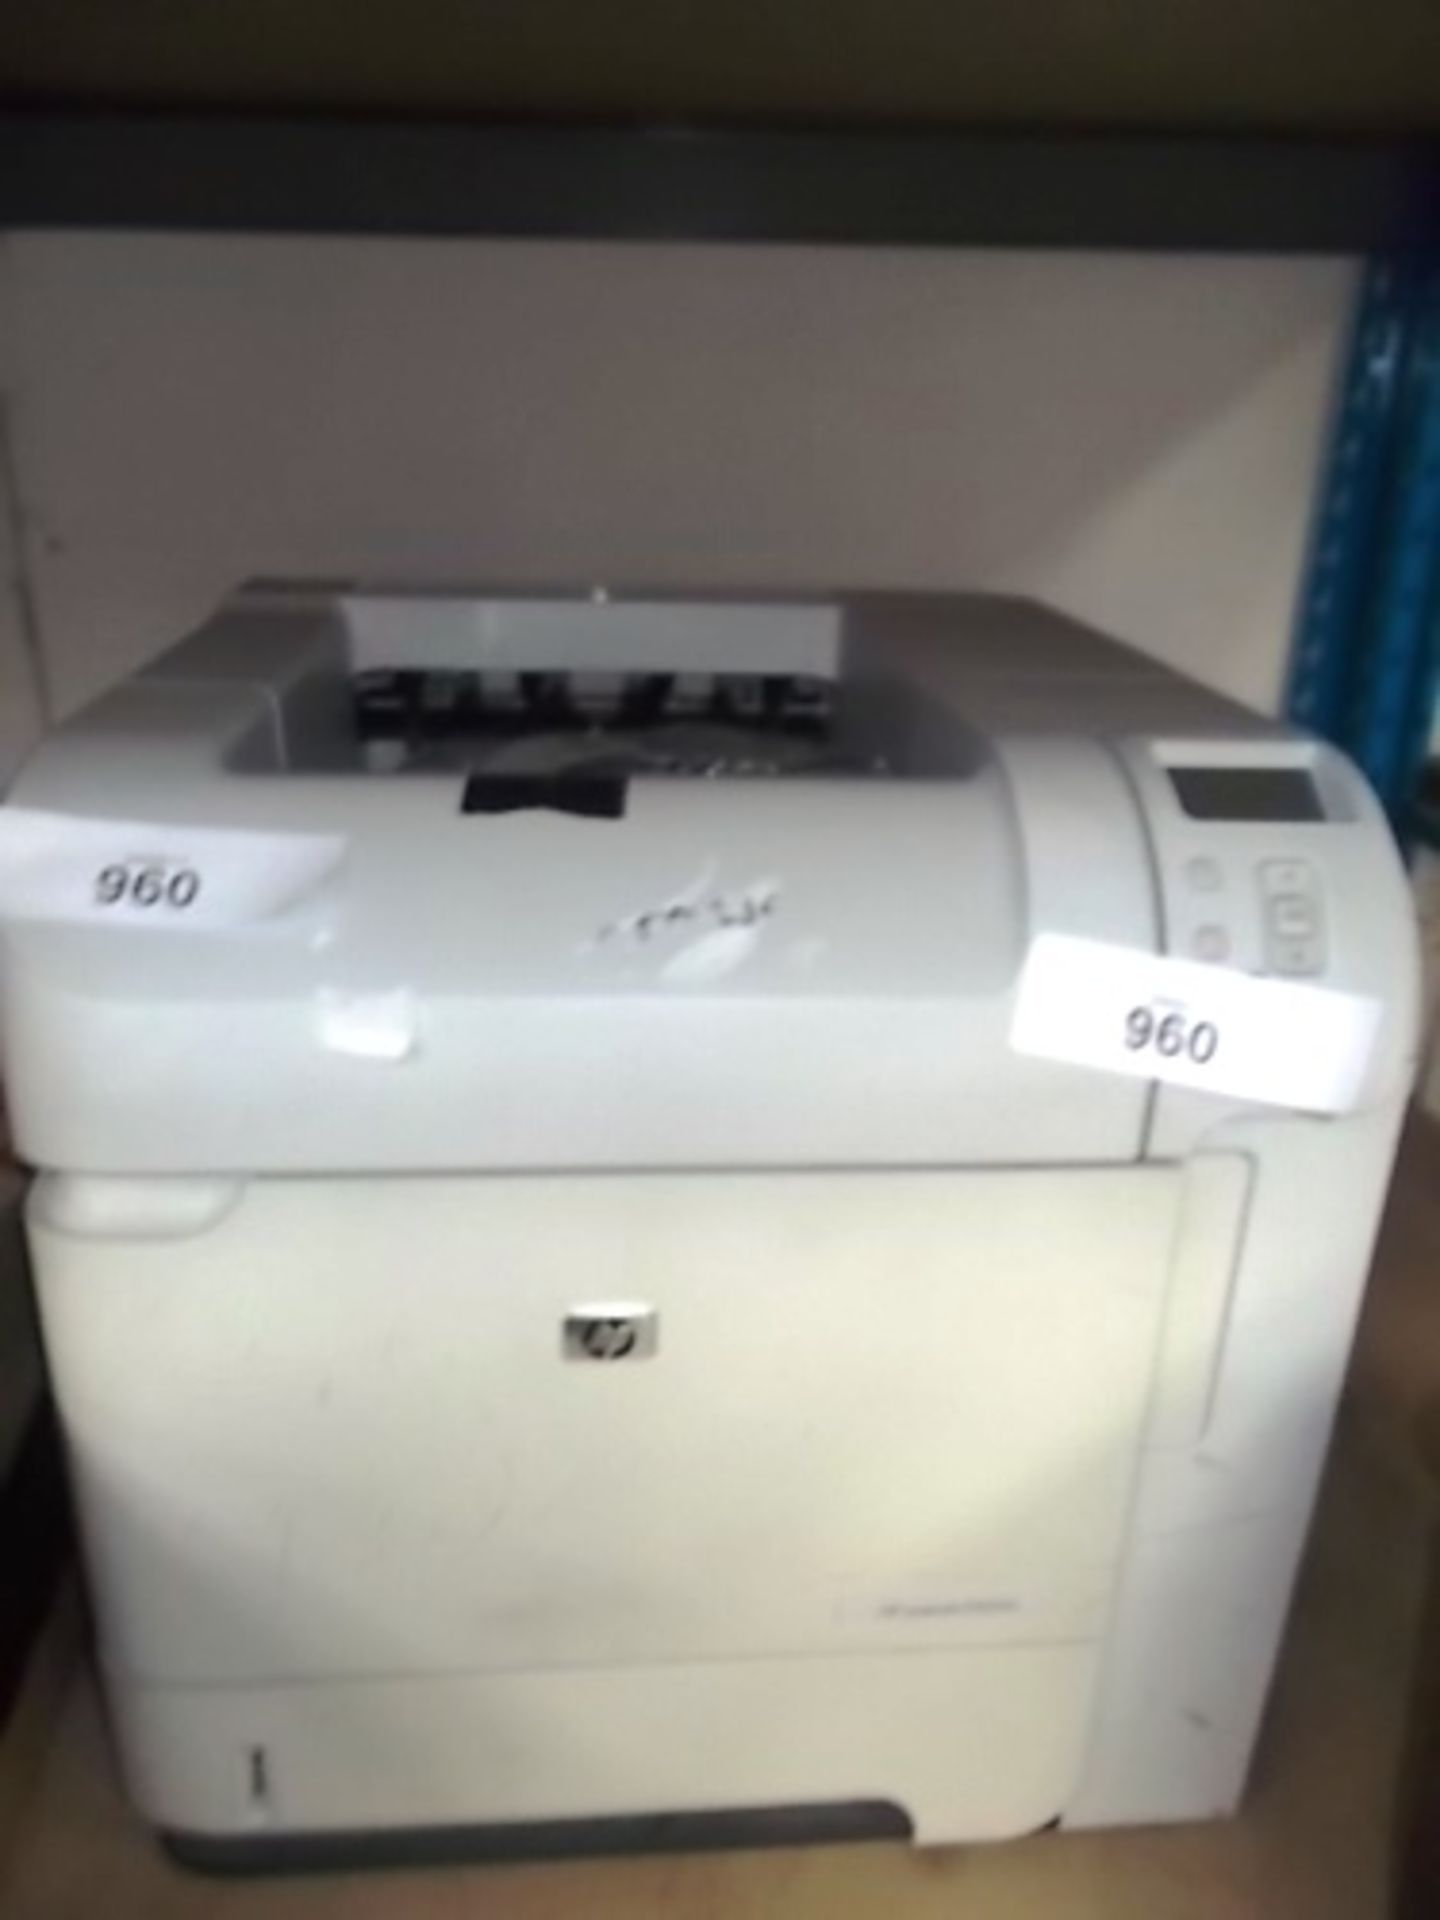 1 x HP Laser-jet P4014n printer with full ink cartridge installed - Second hand, working (GS29)